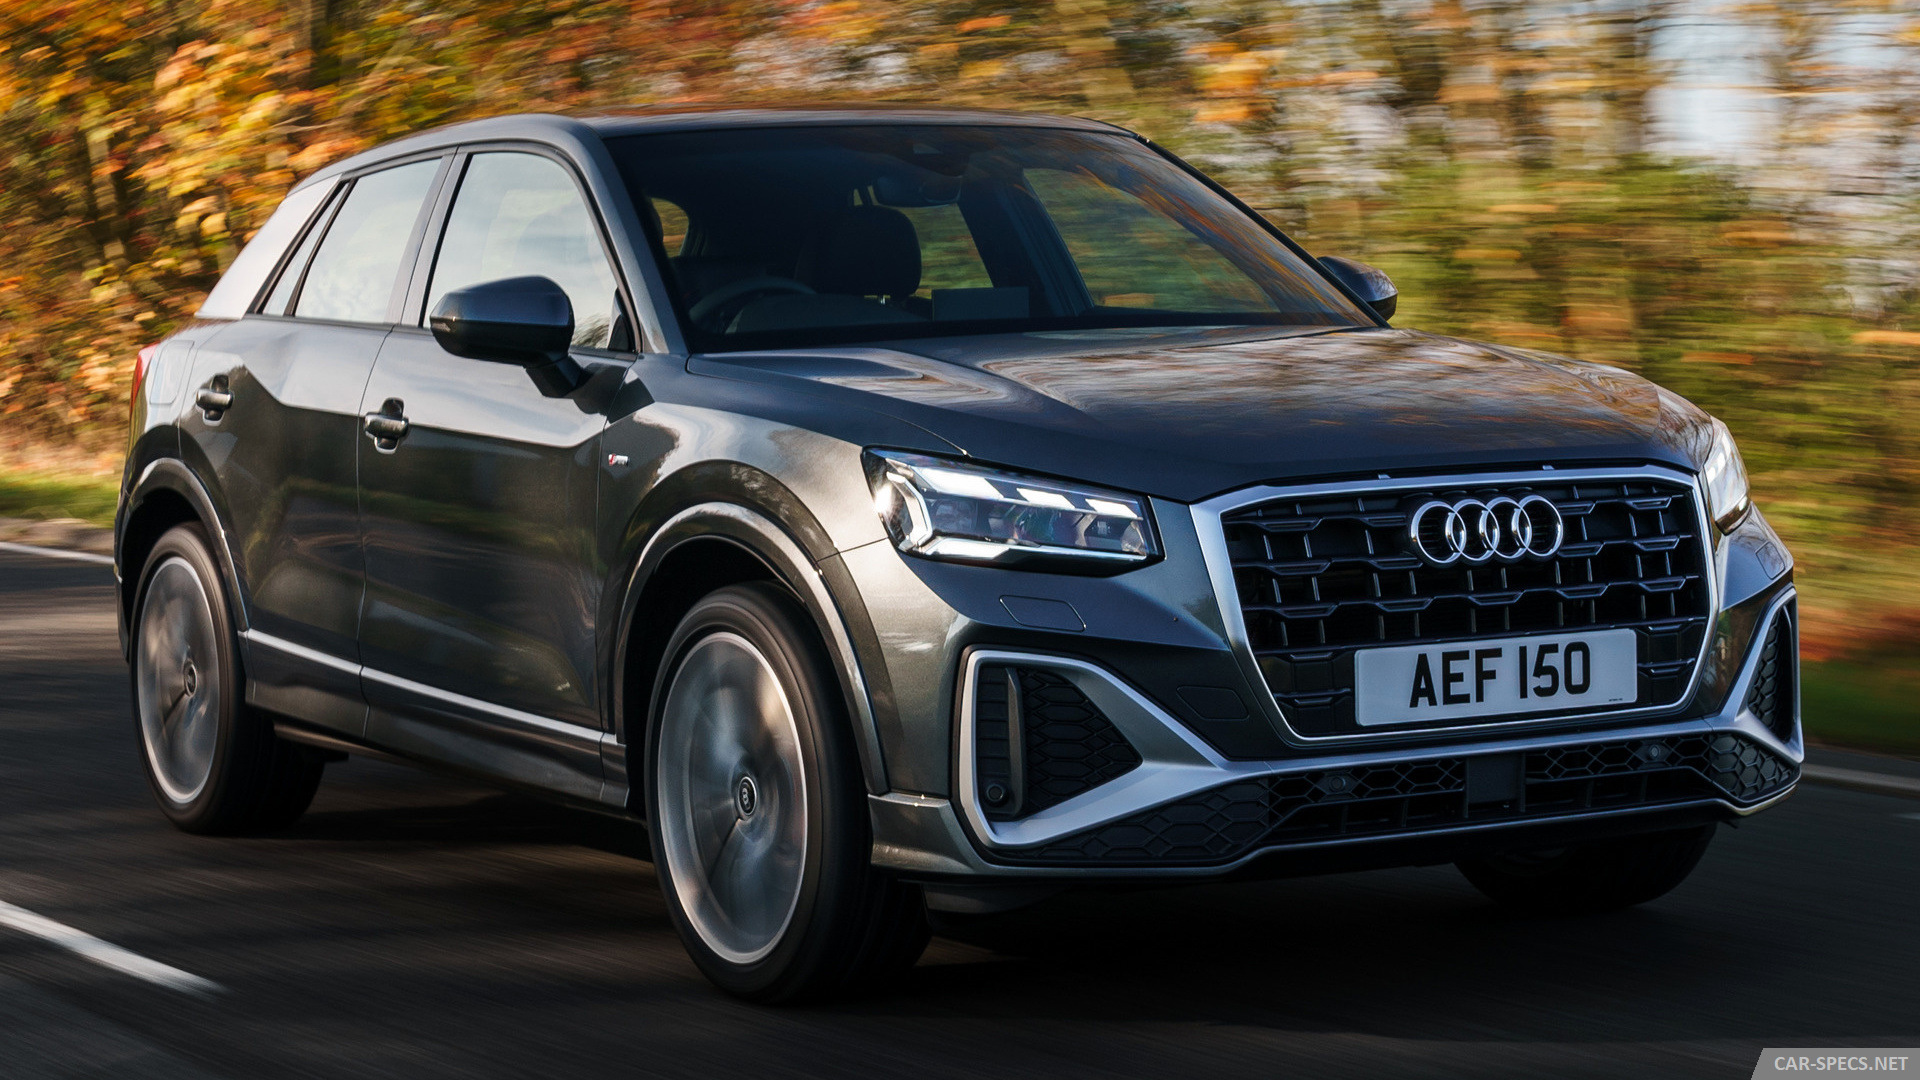 Audi Q2 2020 35 TDI 150 Hp quattro S tronic Technical Specifications and Car Data Engine 